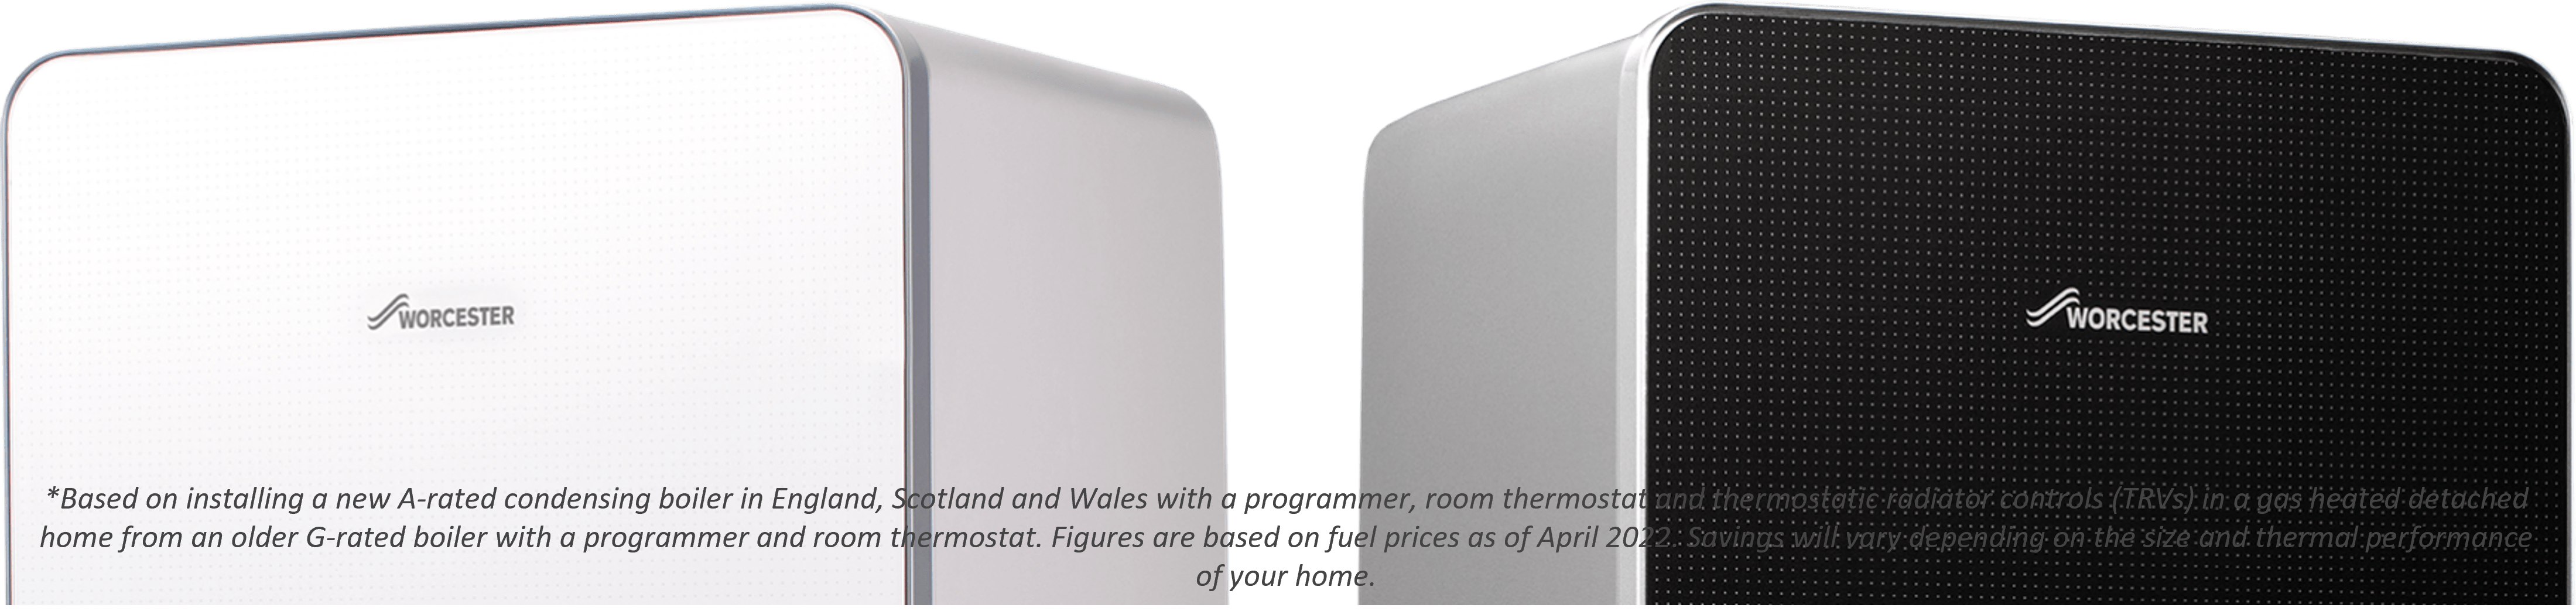 New Boilers | Worcester Bosch